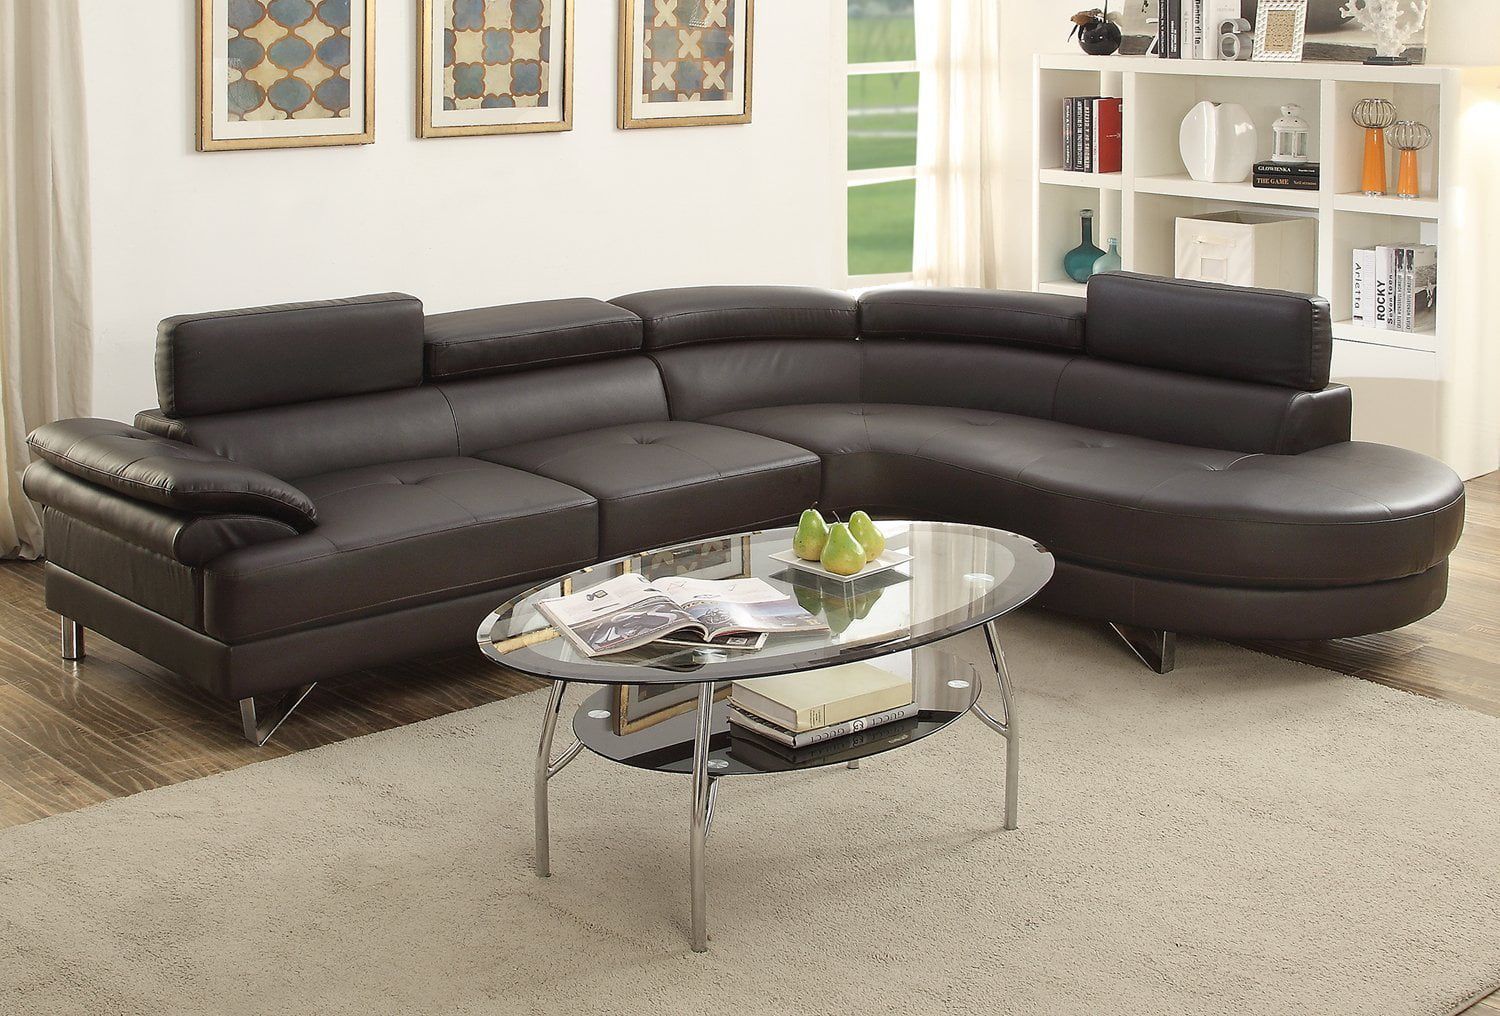 Modern Espresso Faux Leather Sectional Sofa Chaise Set With Flip Up Within Faux Leather Sectional Sofa Sets (View 19 of 21)